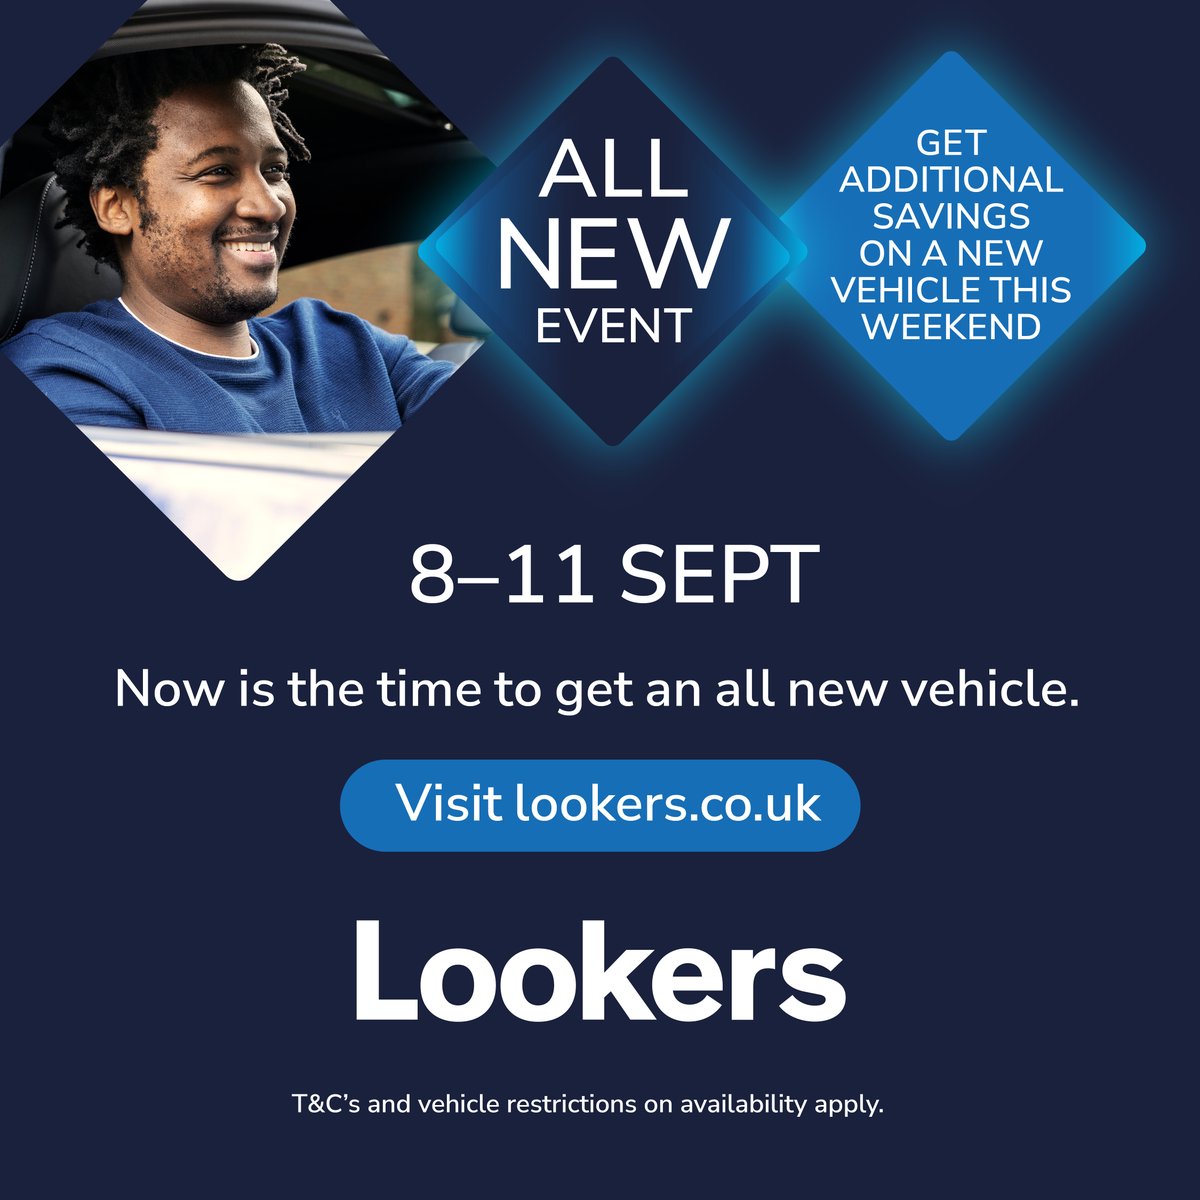 The All-New Event starts September 8! We are giving you additional savings when you buy a new vehicle. Discover the latest and greatest vehicles that'll steal your heart but be quick our offers end September 11. T&Cs and vehicle availability restrictions apply. #AllNewEvent